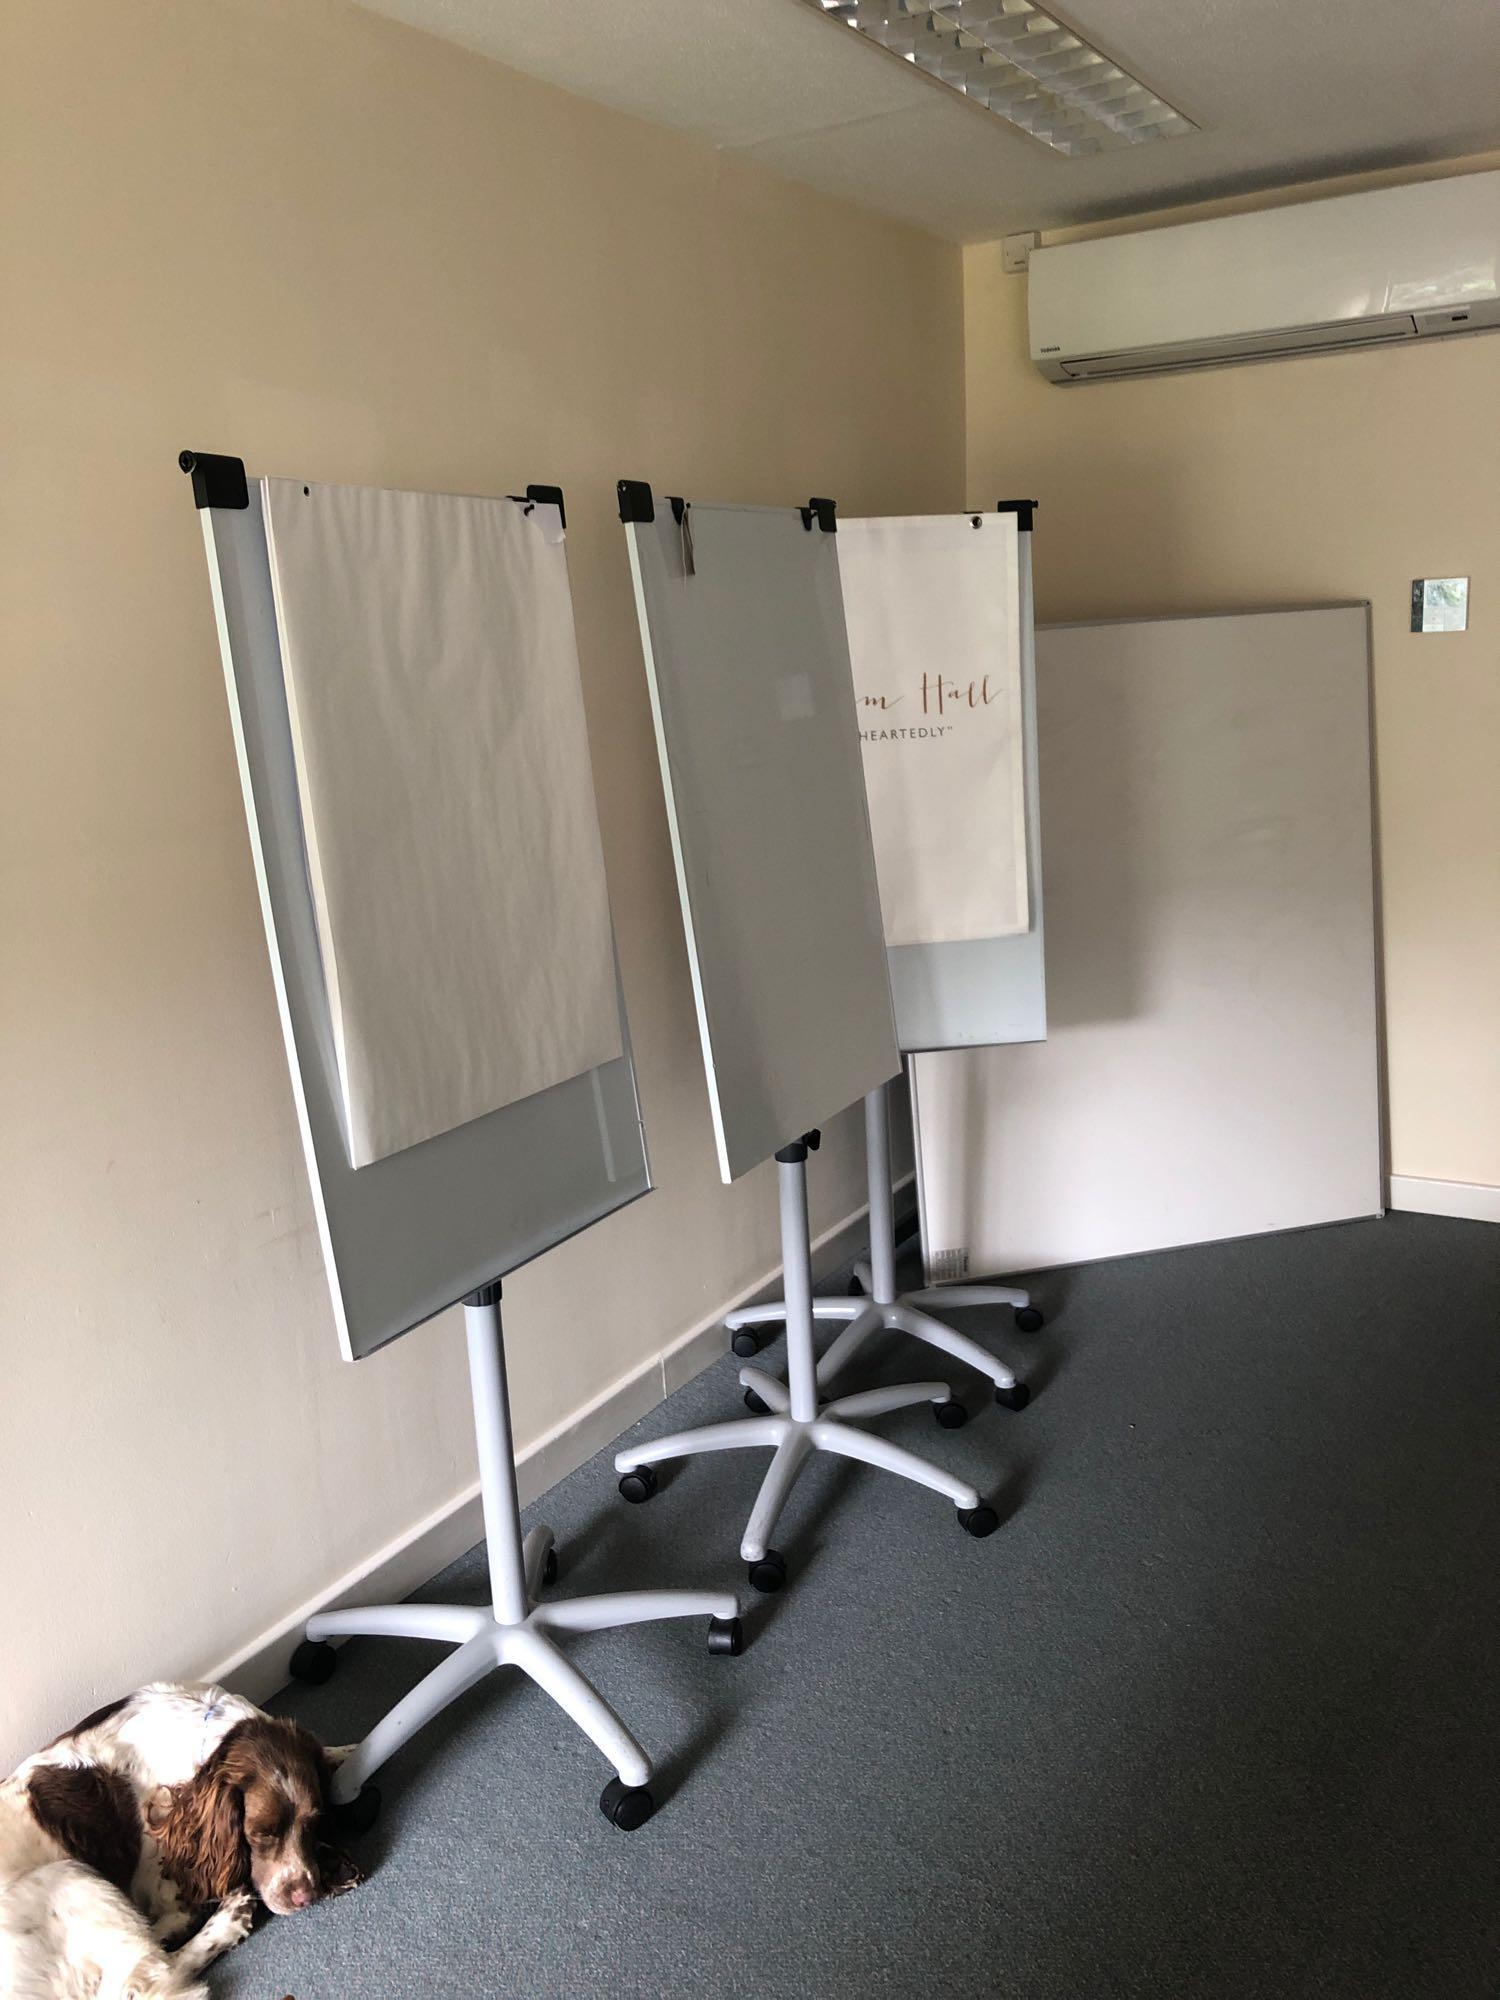 3 x Mobile Whiteboard/Flipchart Adjustable Height Stands One Times Wall Mounted Whiteboard